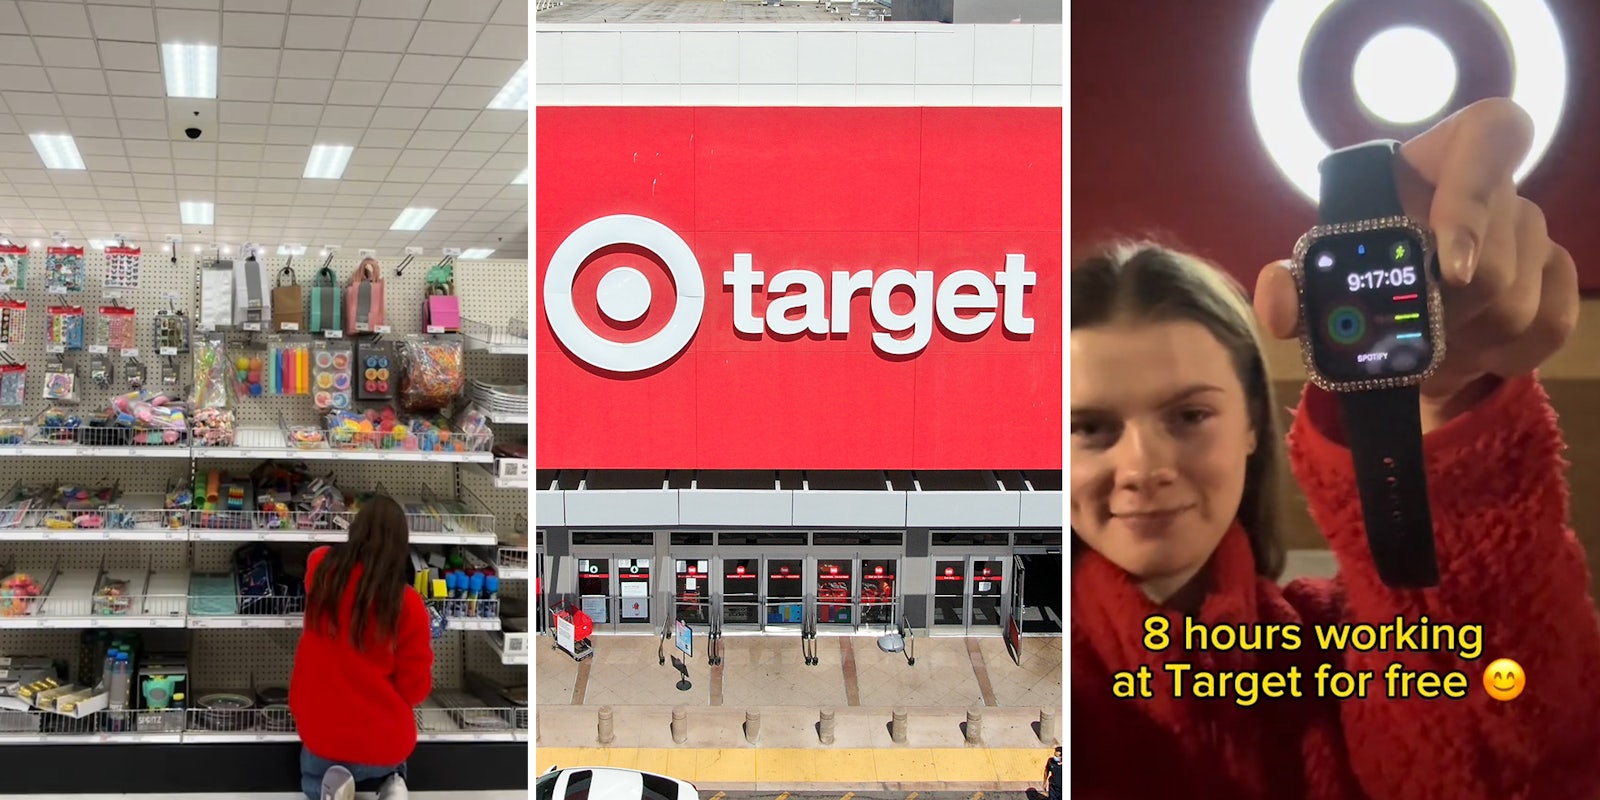 Woman walks into Target and works a 9-hour shift. She’s not an employee